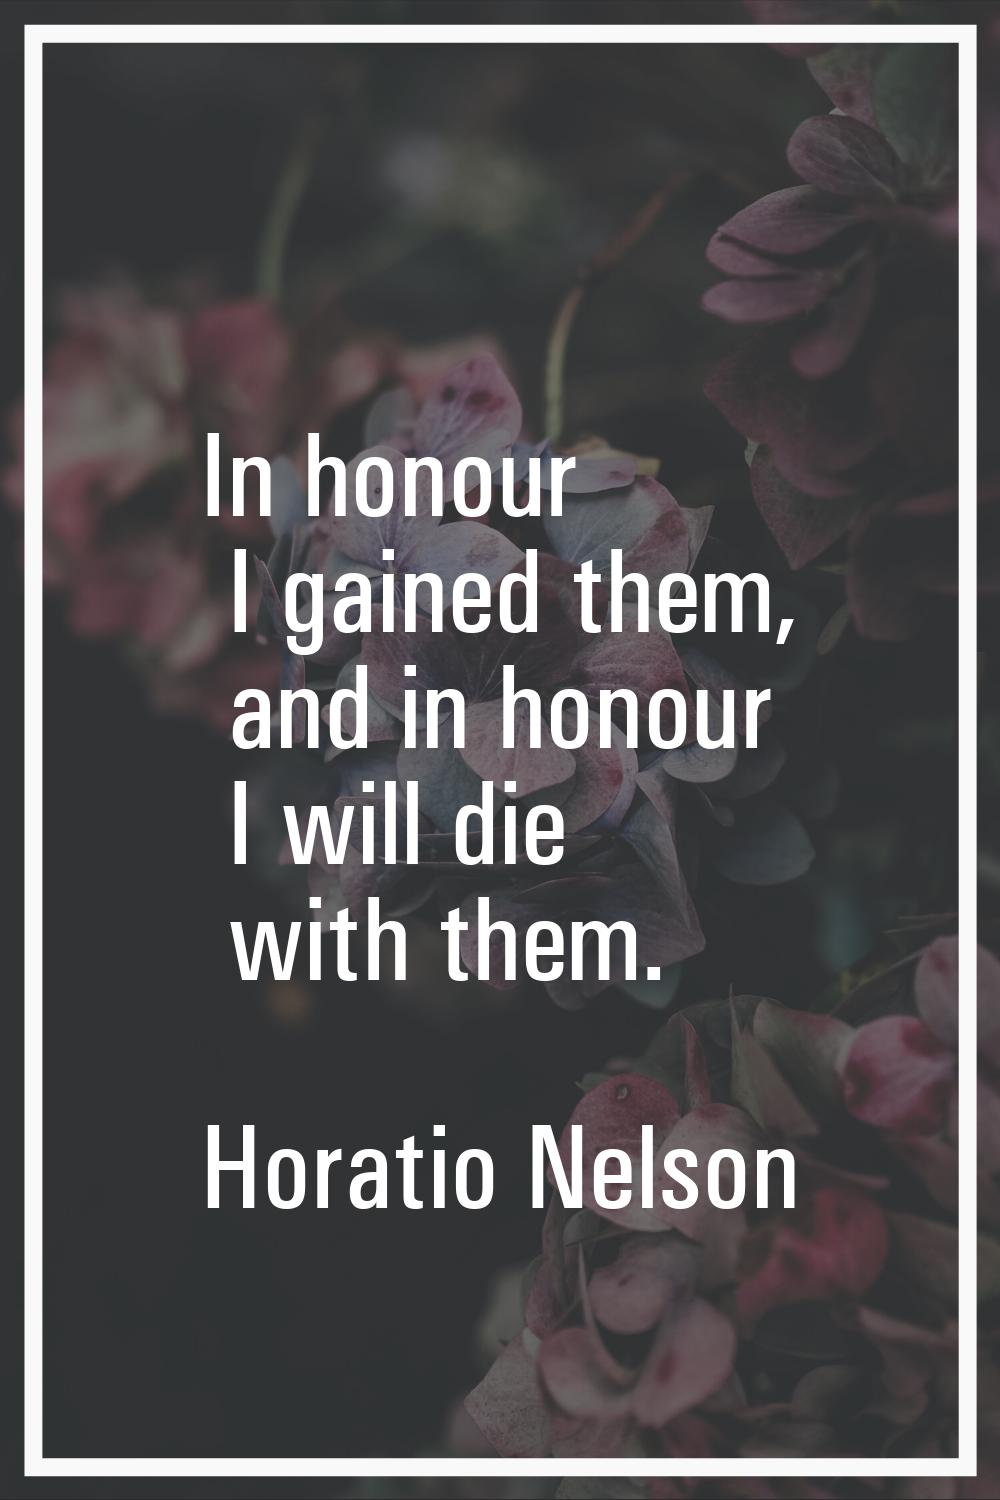 In honour I gained them, and in honour I will die with them.